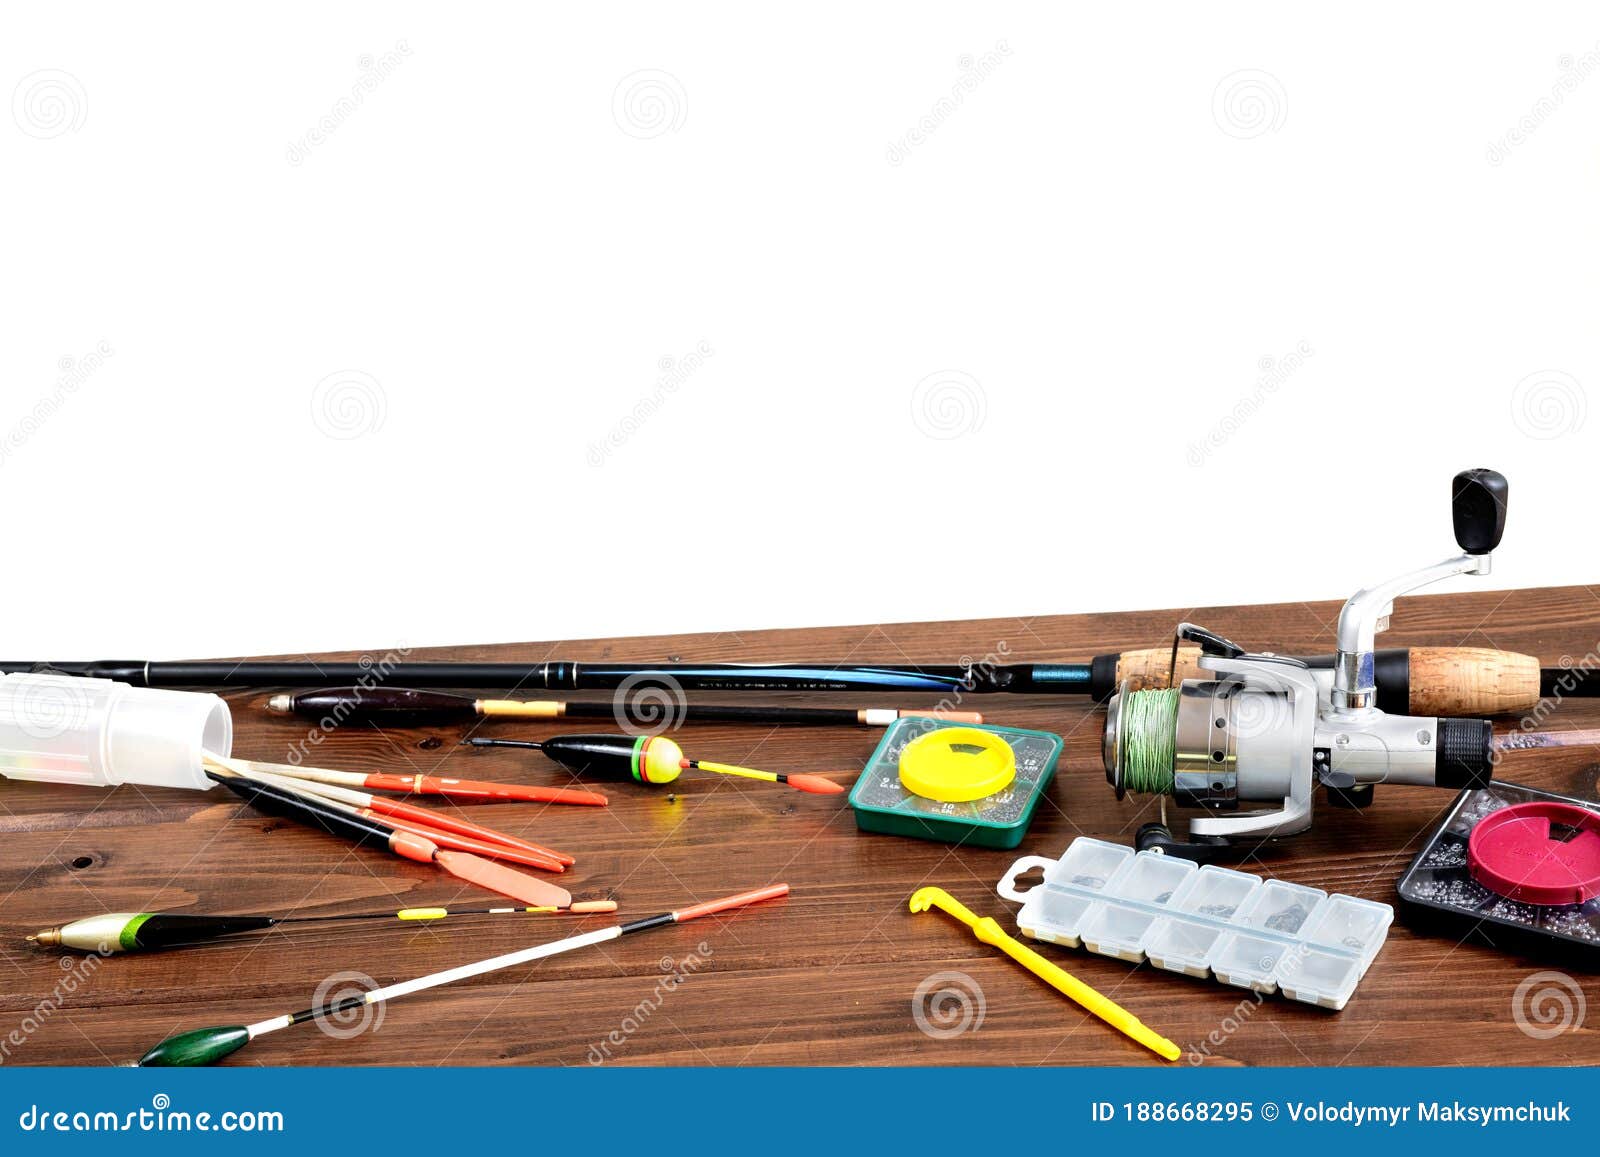 Fishing Tackle - Fishing Rod Fishing Float and Accessories on Wooden  Background, Copy Space Stock Image - Image of accessories, hook: 188668295